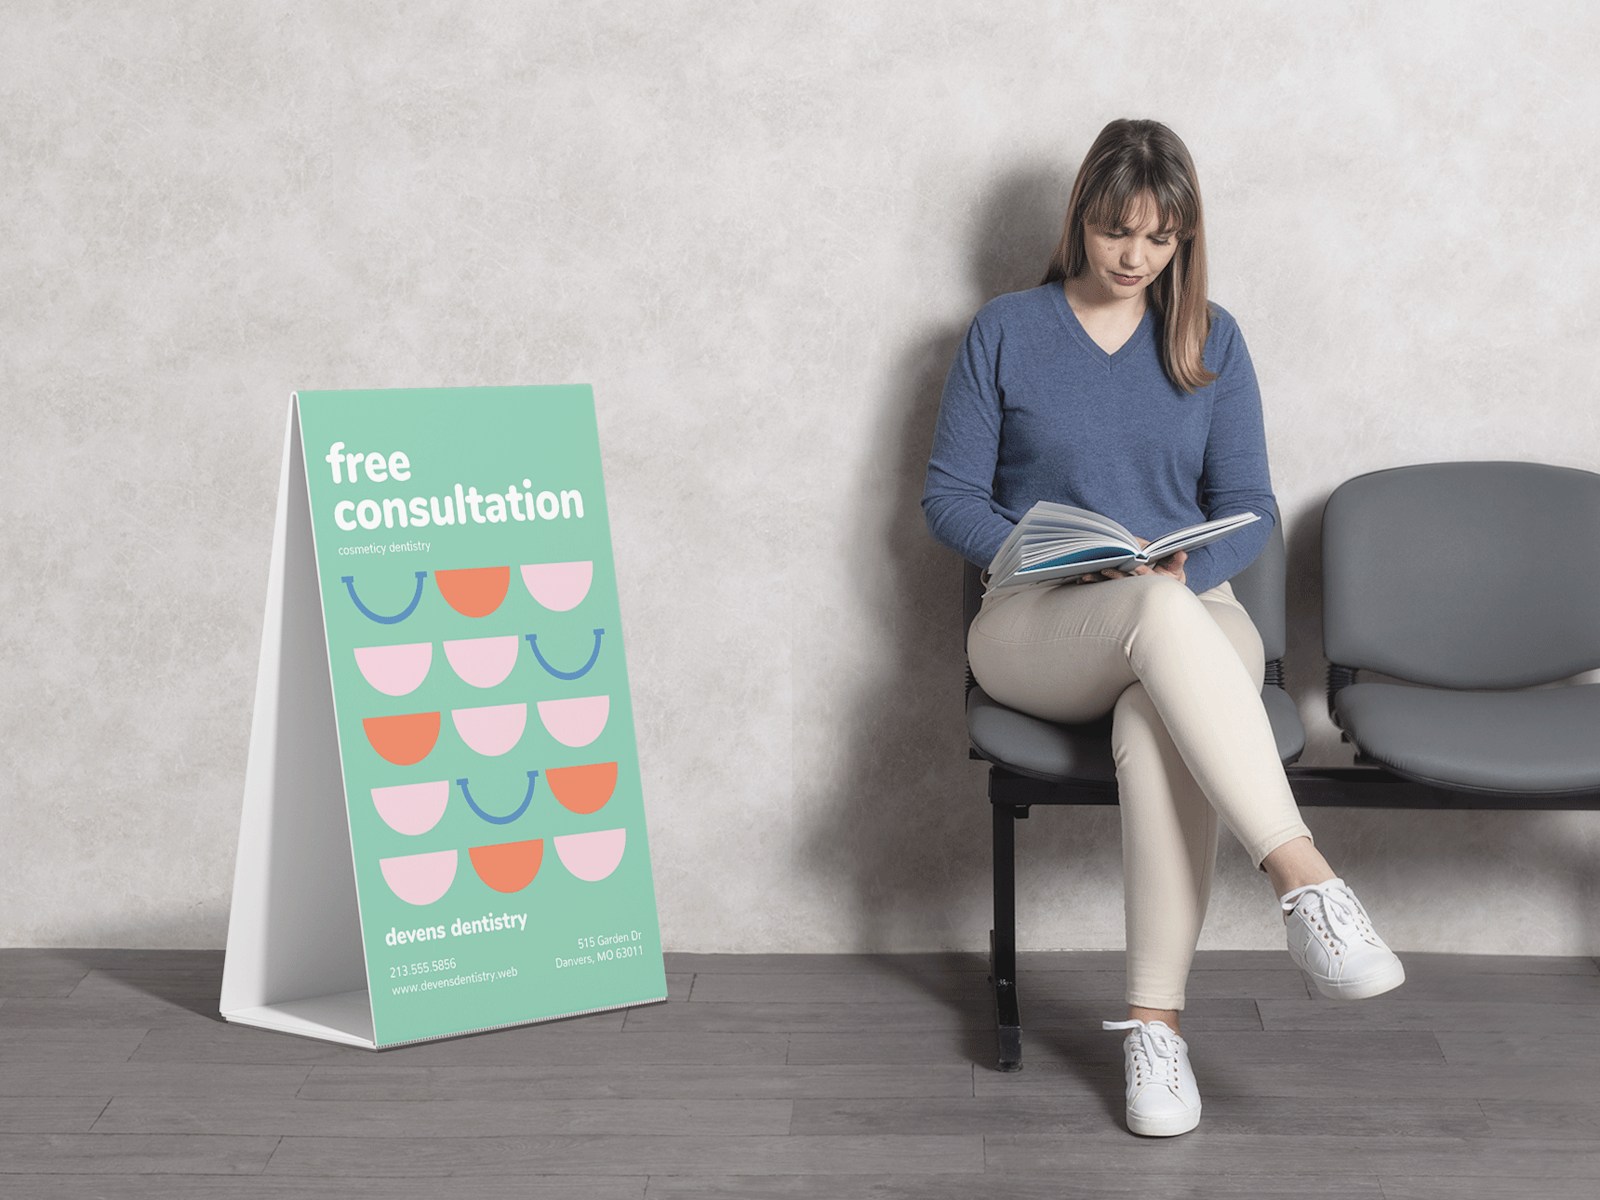 An image of a woman in a blue shirt reading while sitting in a waiting room, with a Corrugated A-frame sign promoting free consultations with a dentist.